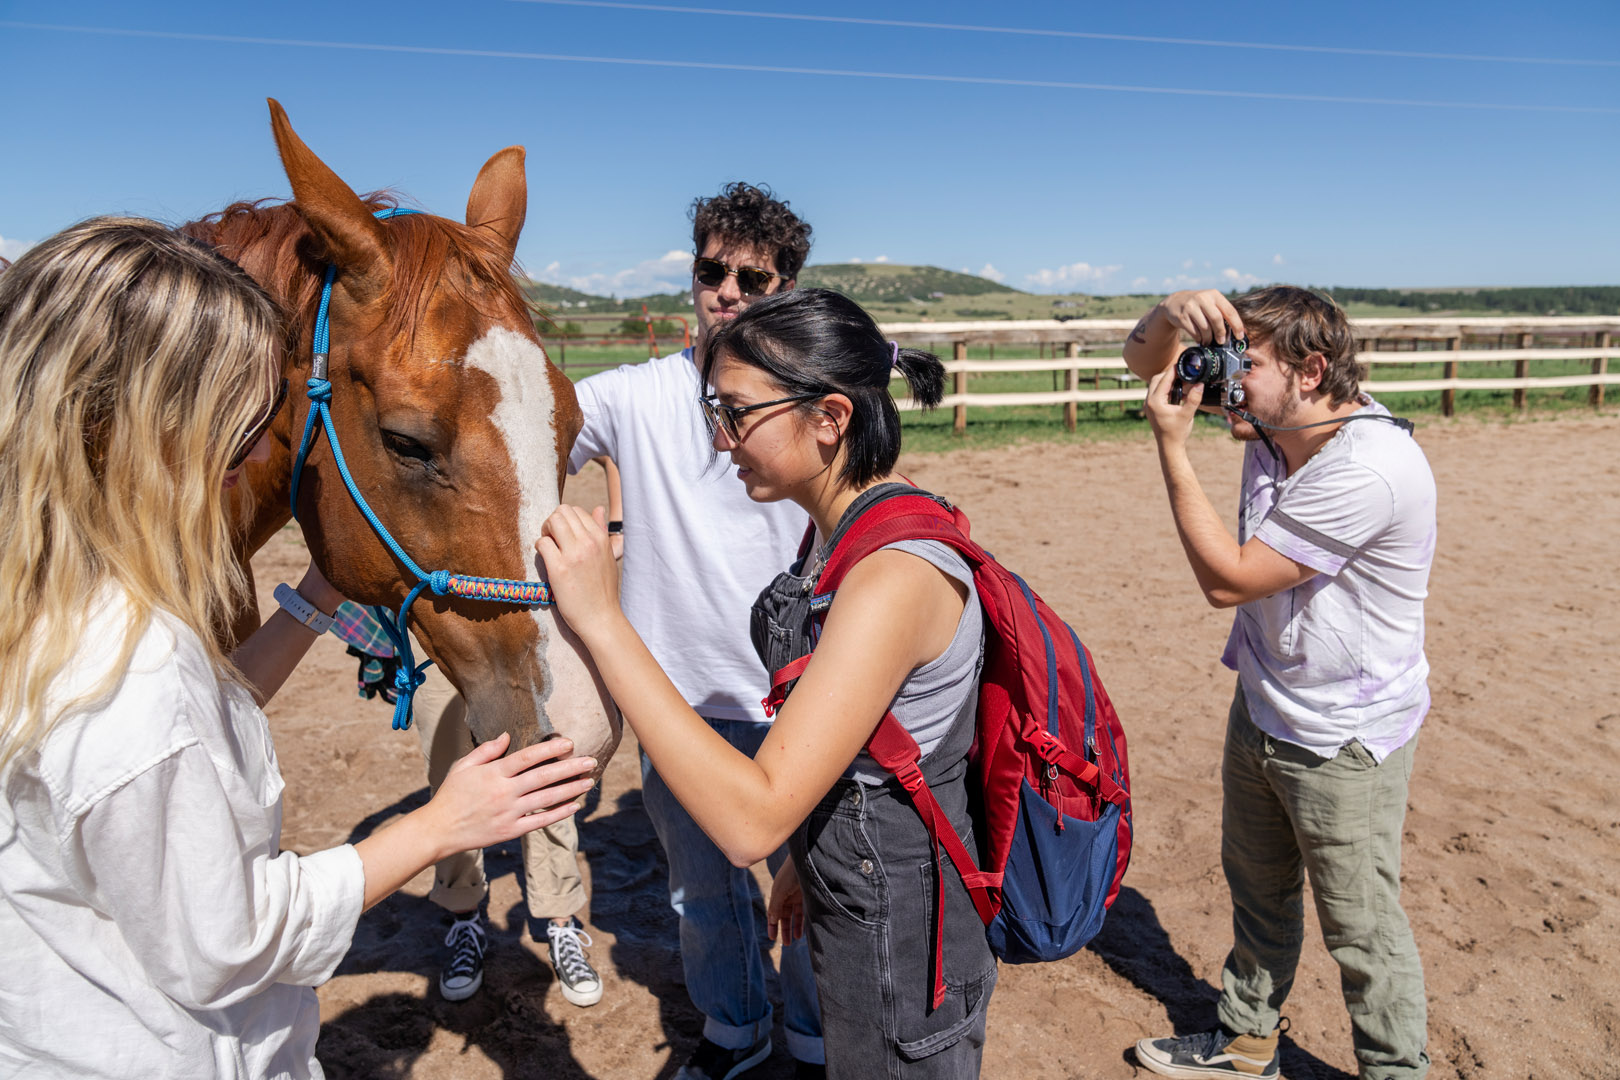 Students connect with Jimmy during Assistant Professor and Director of the Italian Program Amanda Minervini summer session course on an Equine-Guided Experience on Monday, 8/8/22. The goal of the experience is to teach students general focus and awareness. Photo by Lonnie Timmons III / Colorado College.